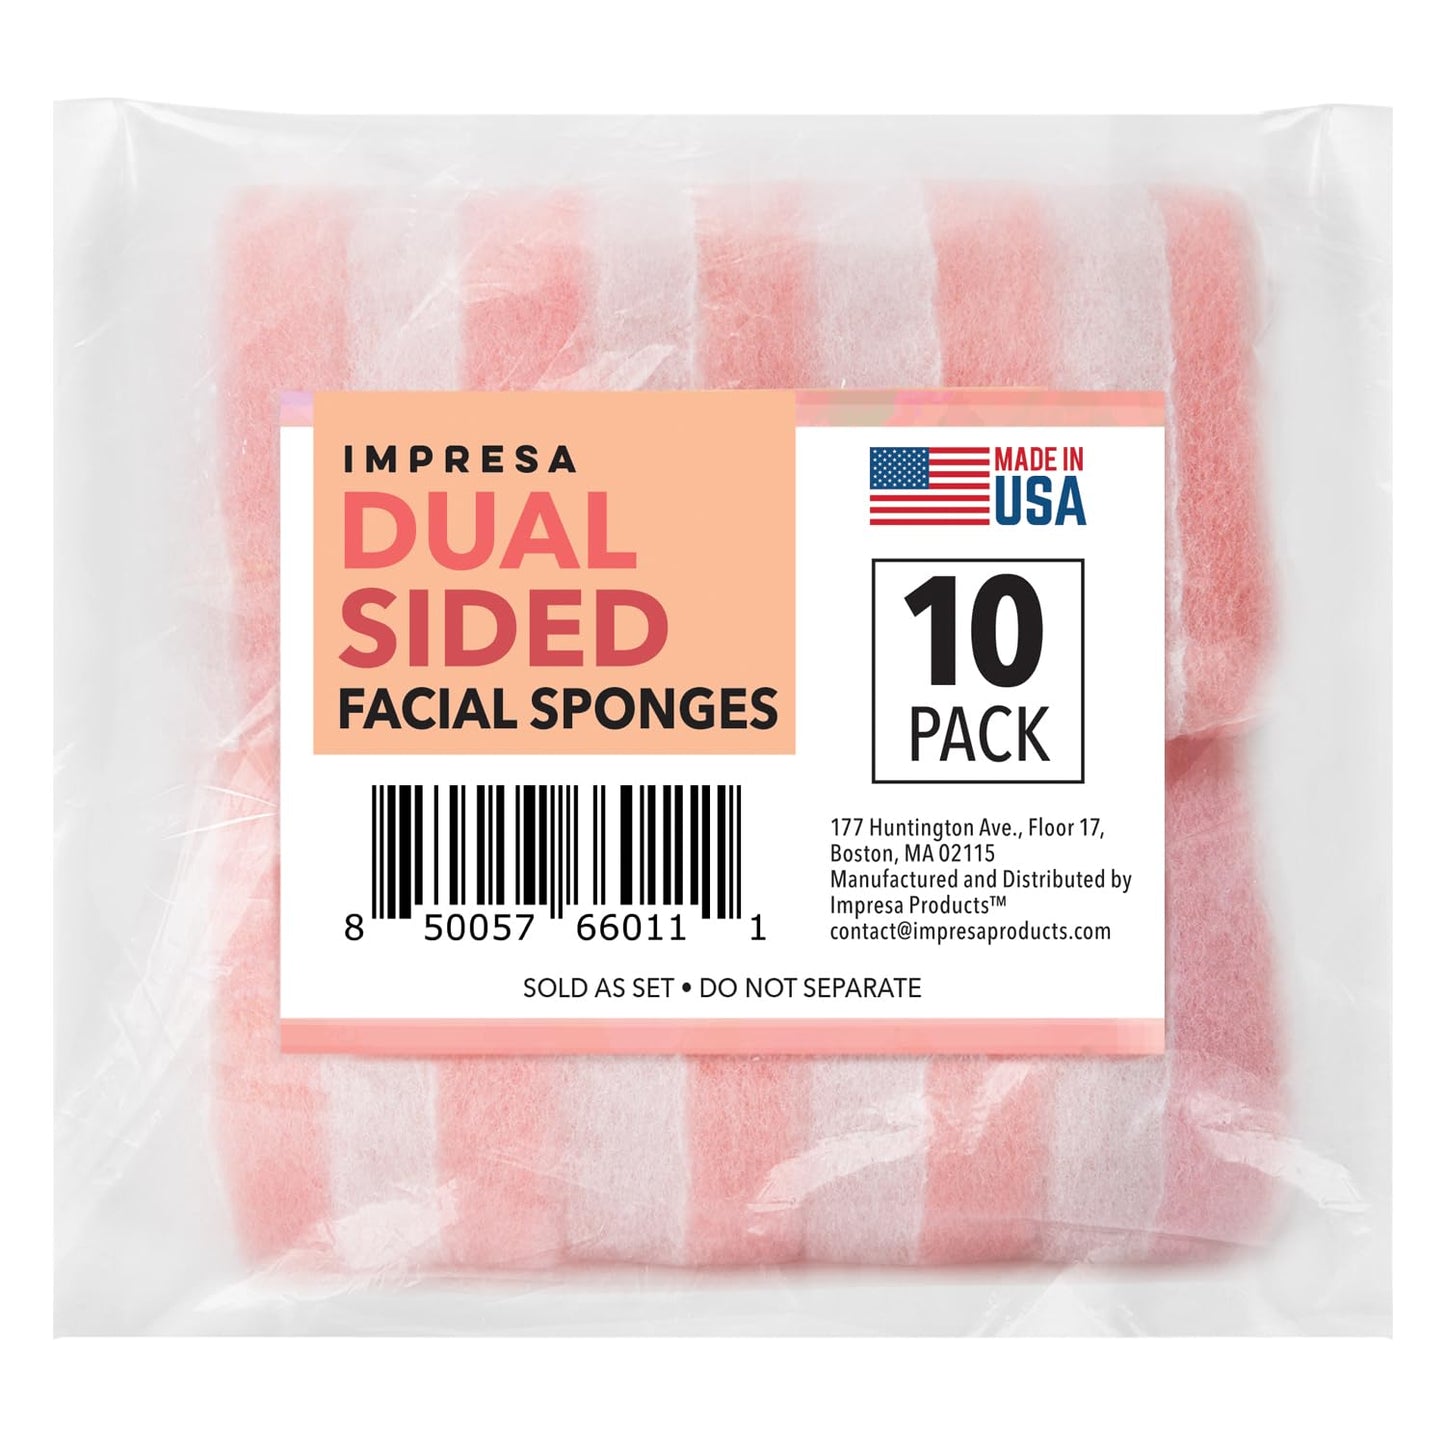 10 Pack Dual Sided Thick Facial Sponge for Daily Deep Cleansing, Gentle and Regular Exfoliating - Buff Facial Sponge Pads for Removing Dead Skin, Dirt, and Makeup - Made in USA (Normal to Oily)